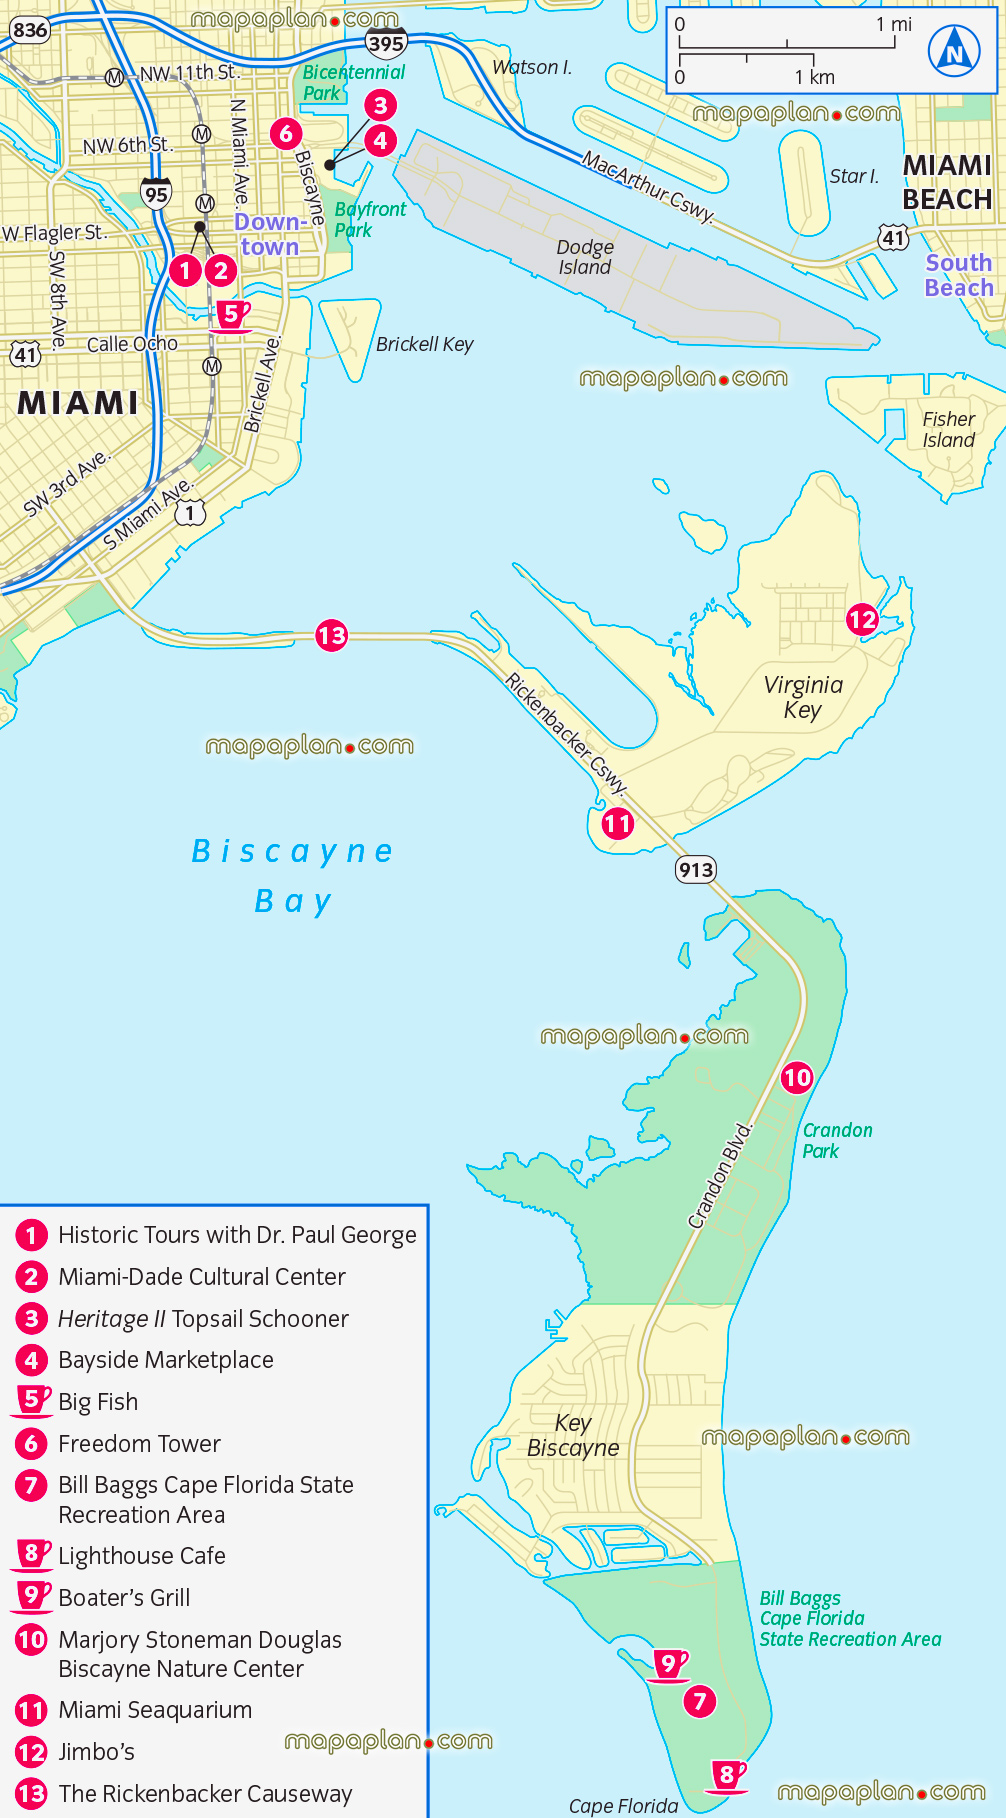 miami key biscayne two day trip miami seaquarium rickenbacker causeway virginia key printable attractions top spots must see iconic locations simple outline neighborhoods districts roads must see places free download layout plan